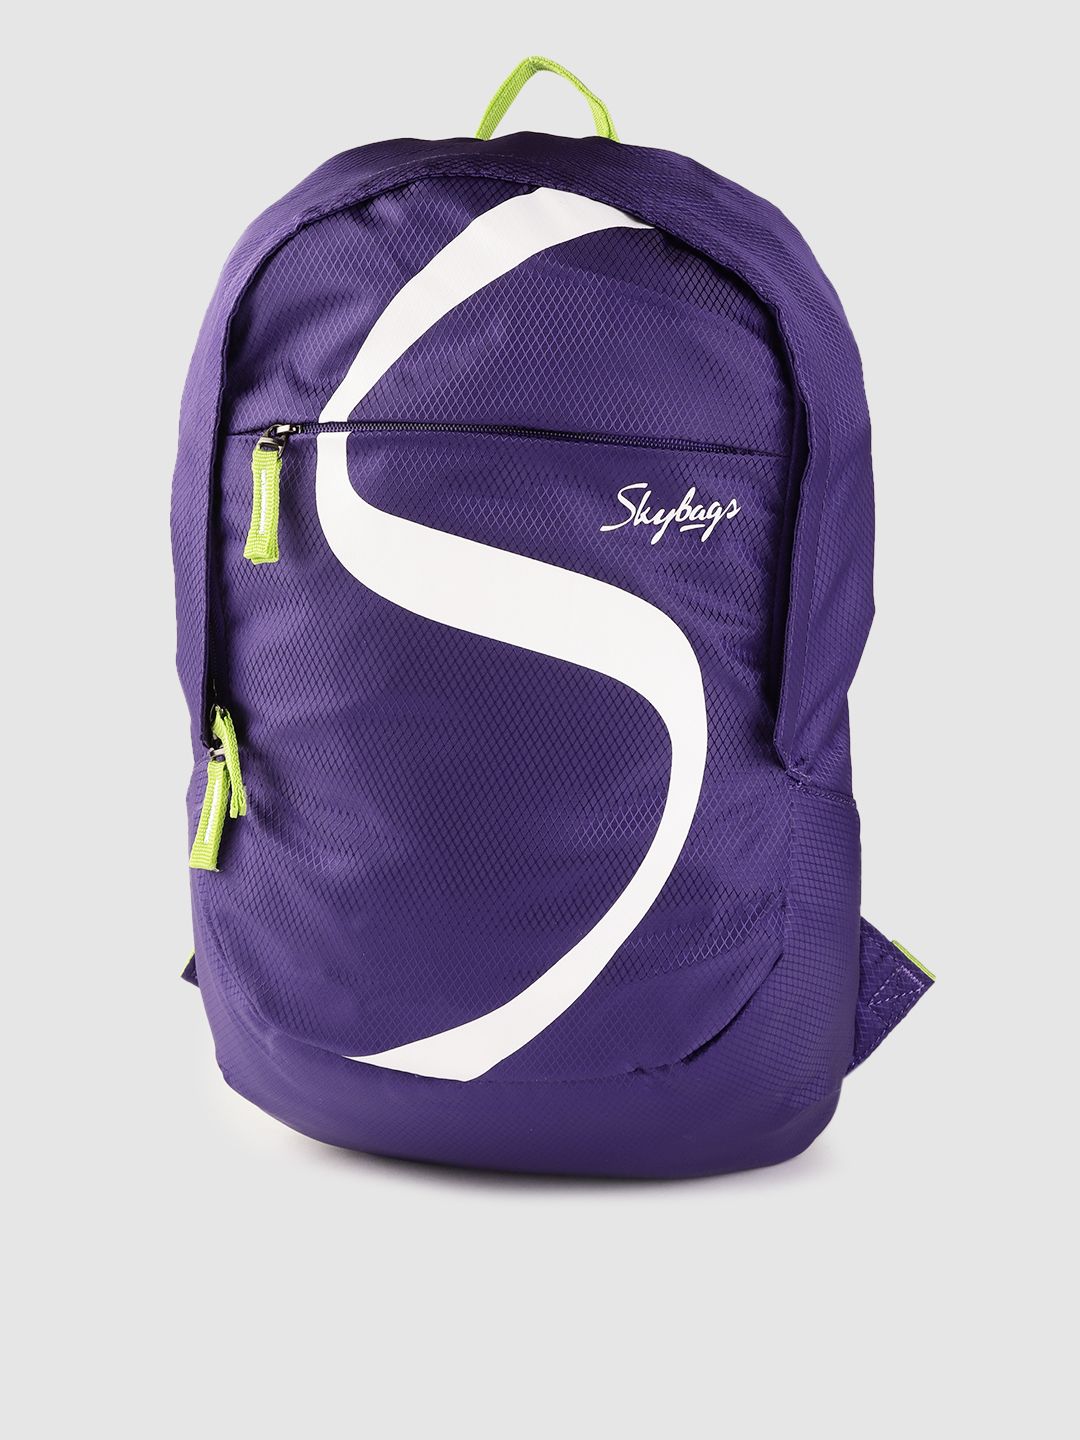 Skybags Unisex Purple Brand Logo Backpack Price in India